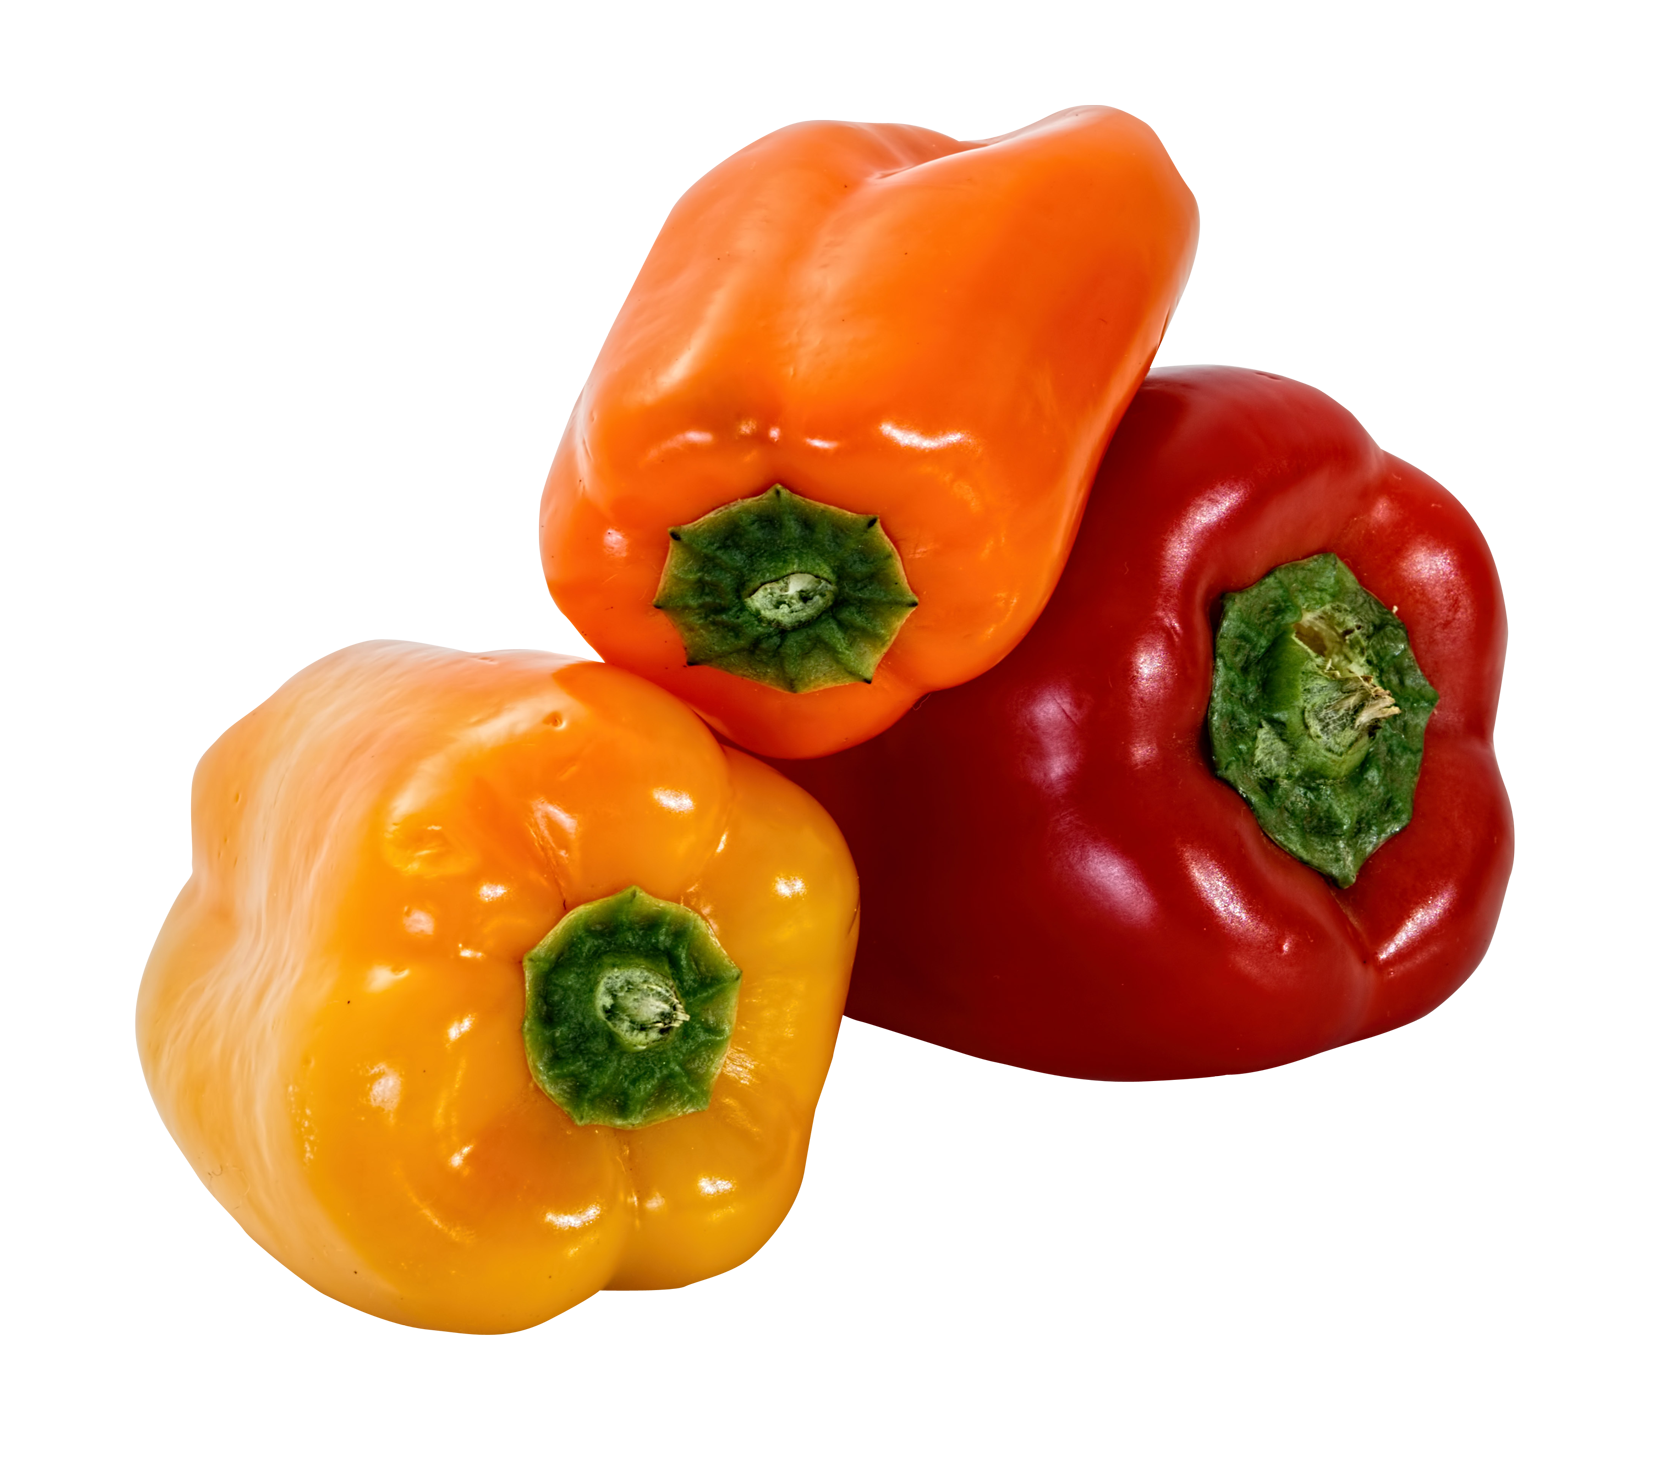 Png image purepng free. Vegetables clipart bell pepper